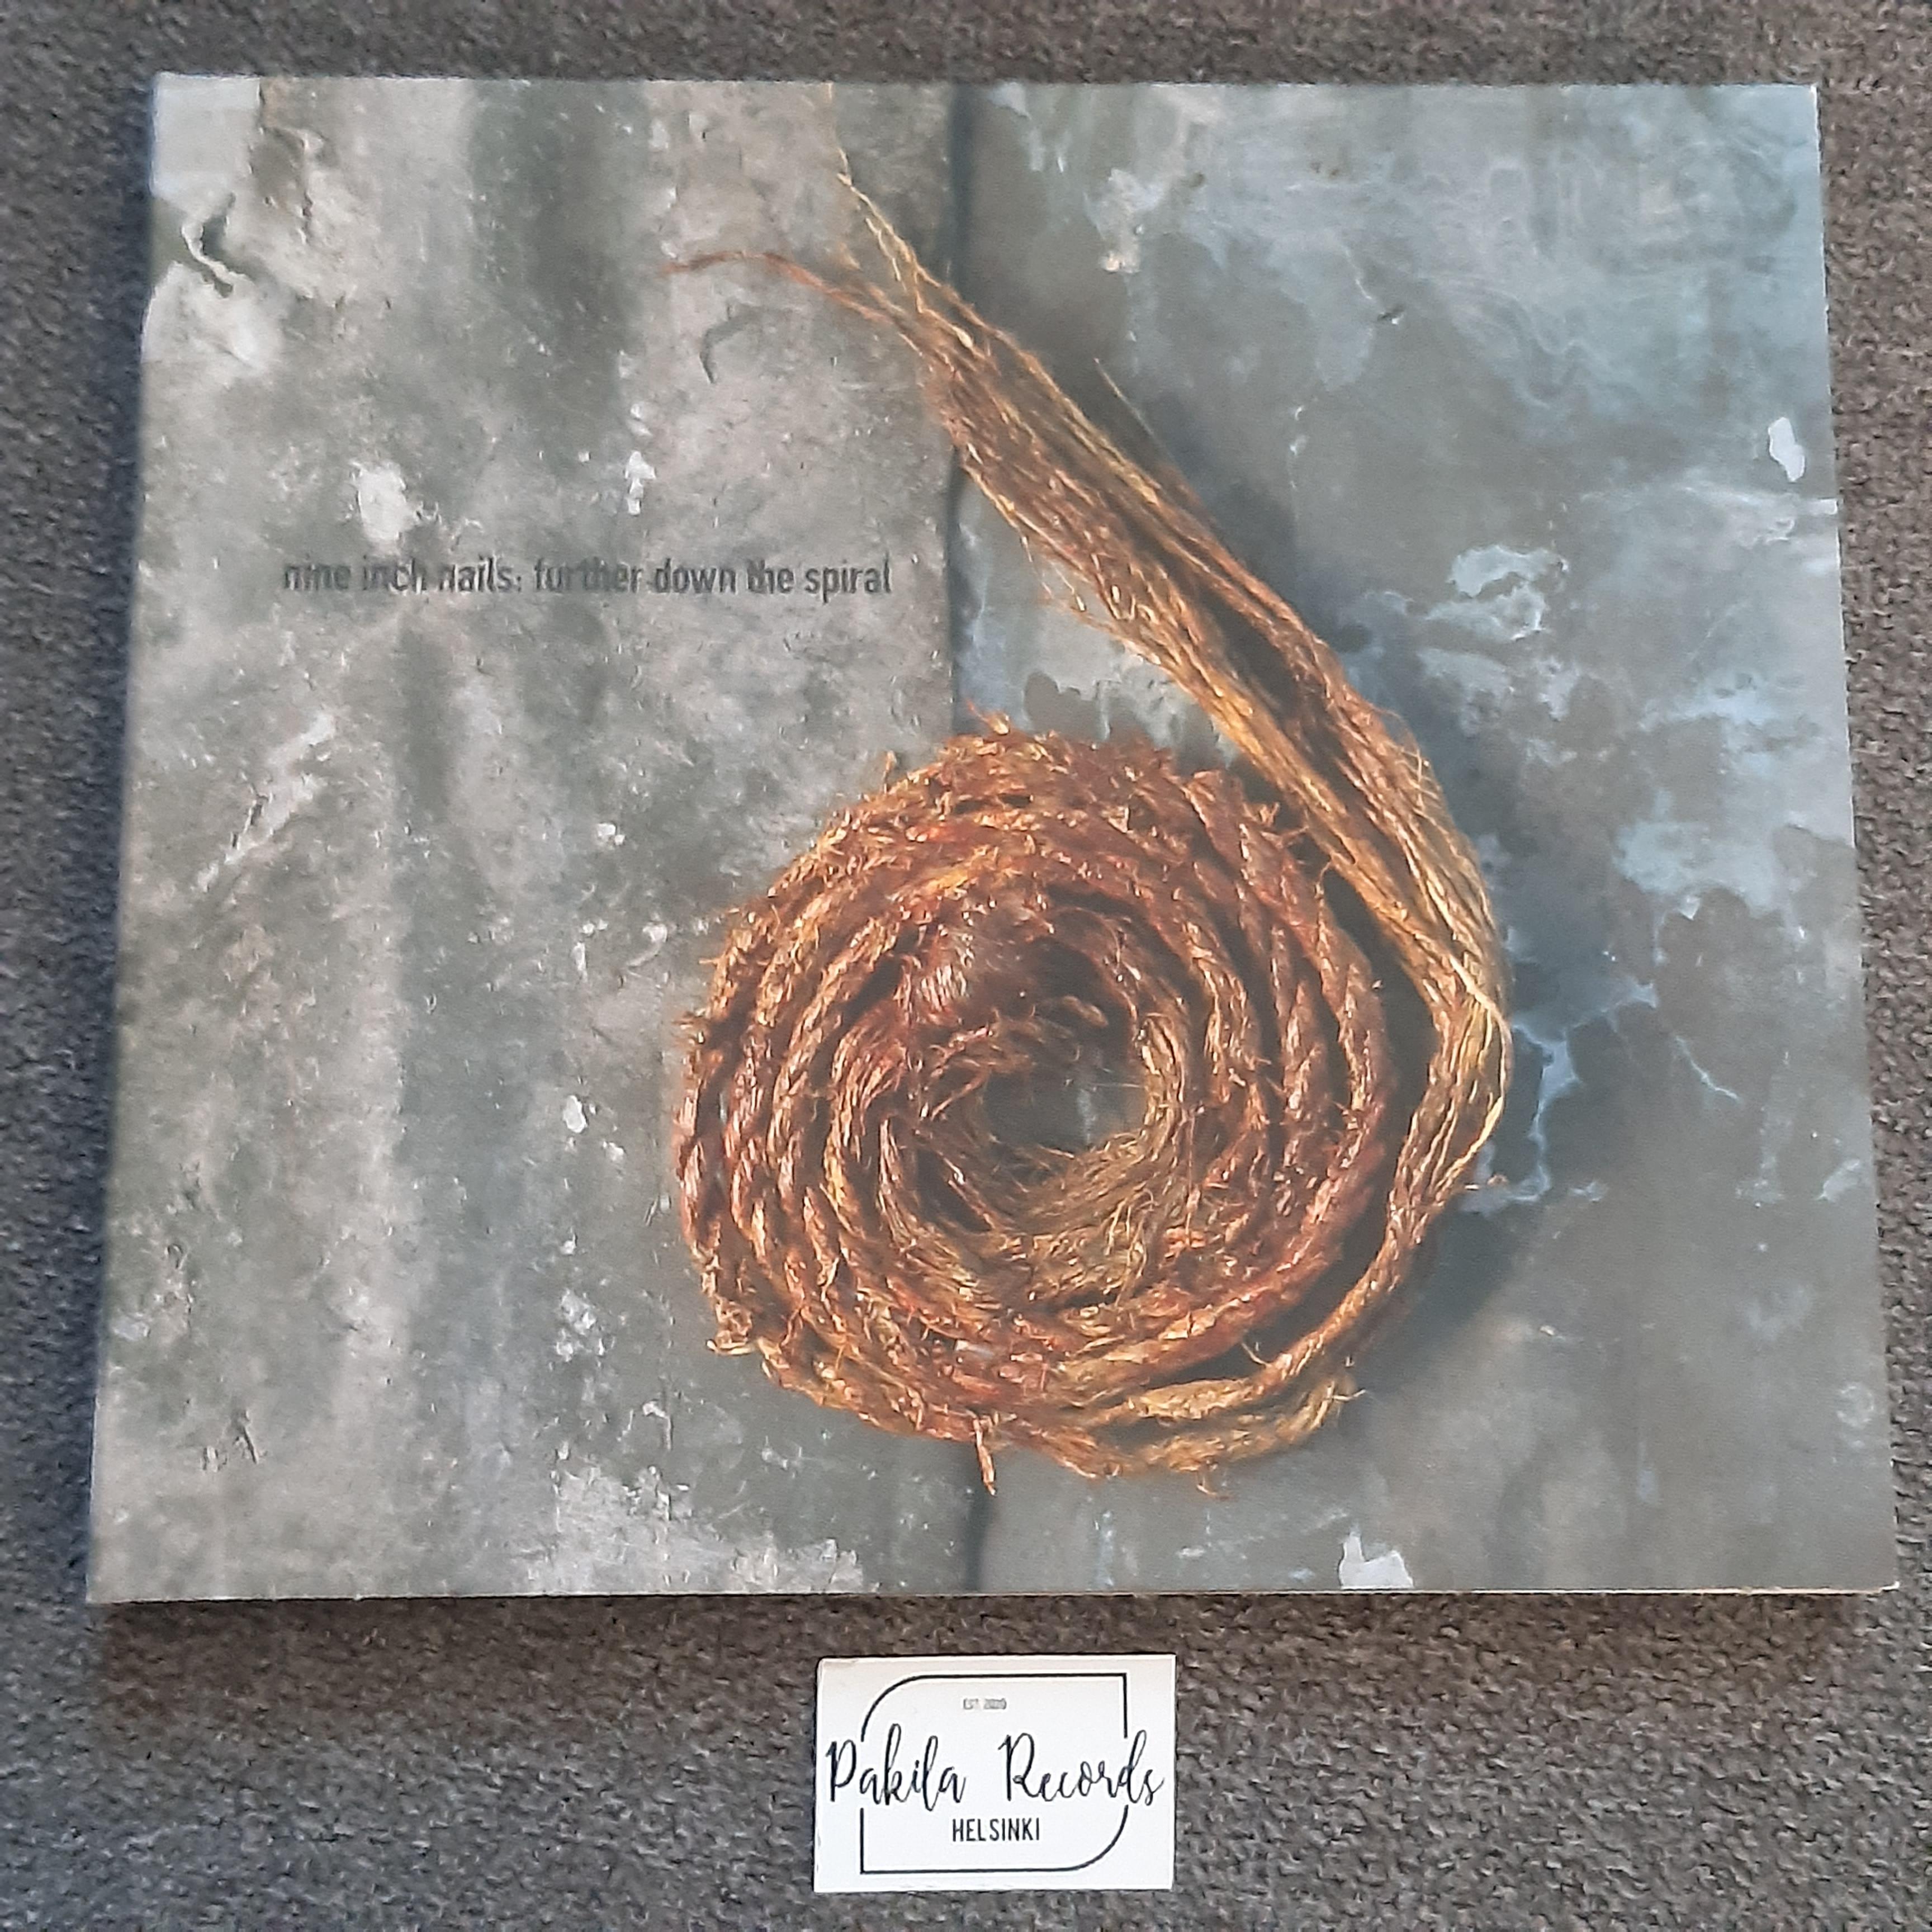 Nine Inch Nails - Further Down The Spiral - CD (käytetty)